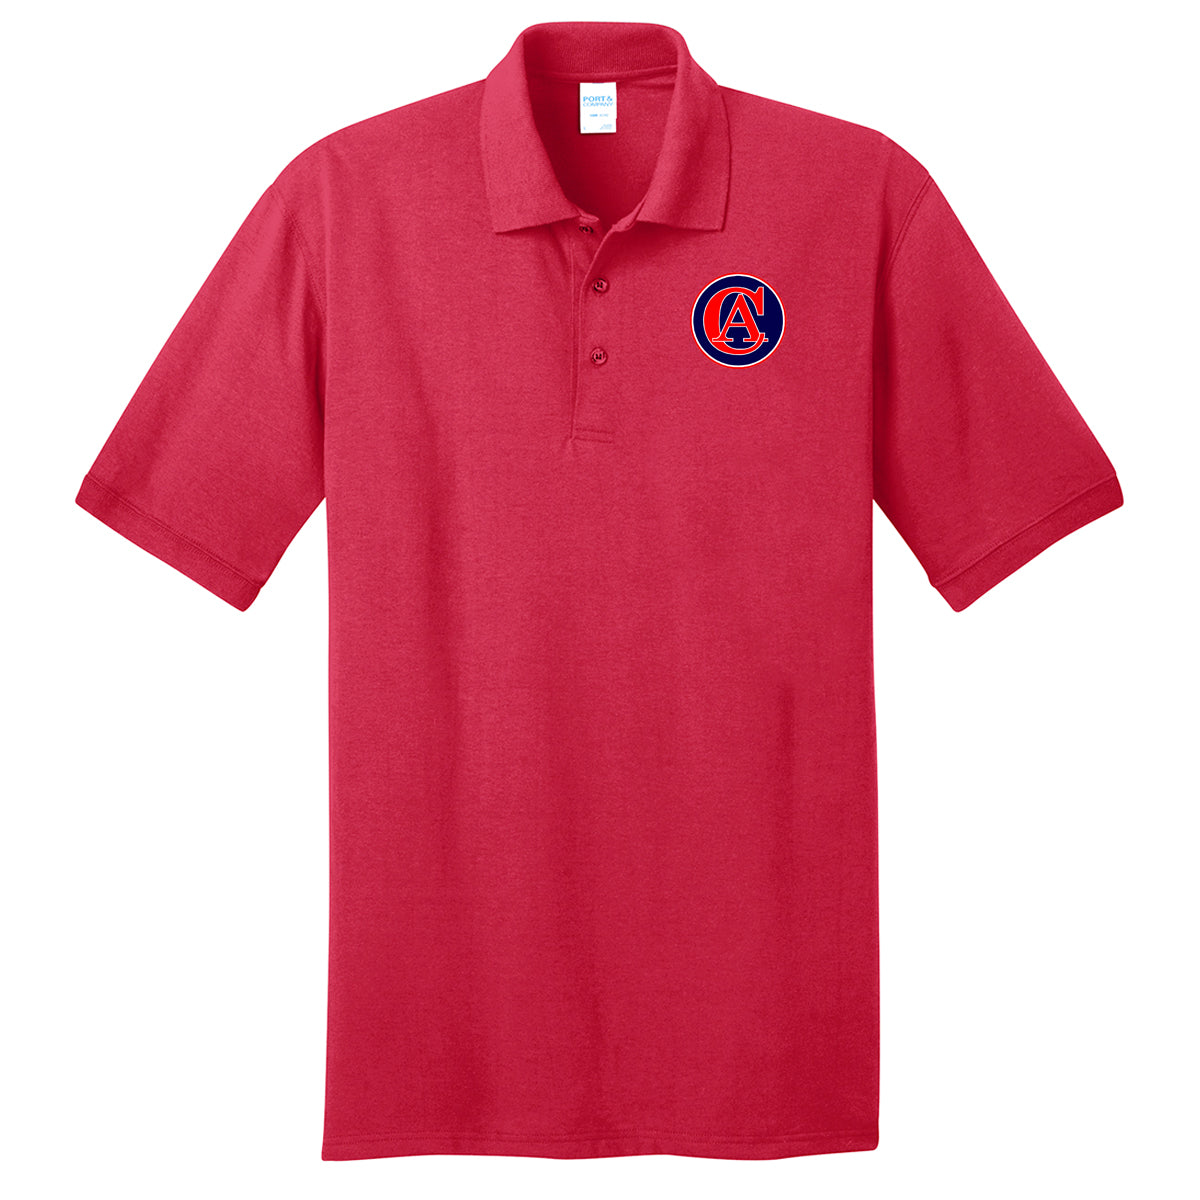 Covenant - Toddler/Youth Polo - Red (KP55Y) - Southern Grace Creations